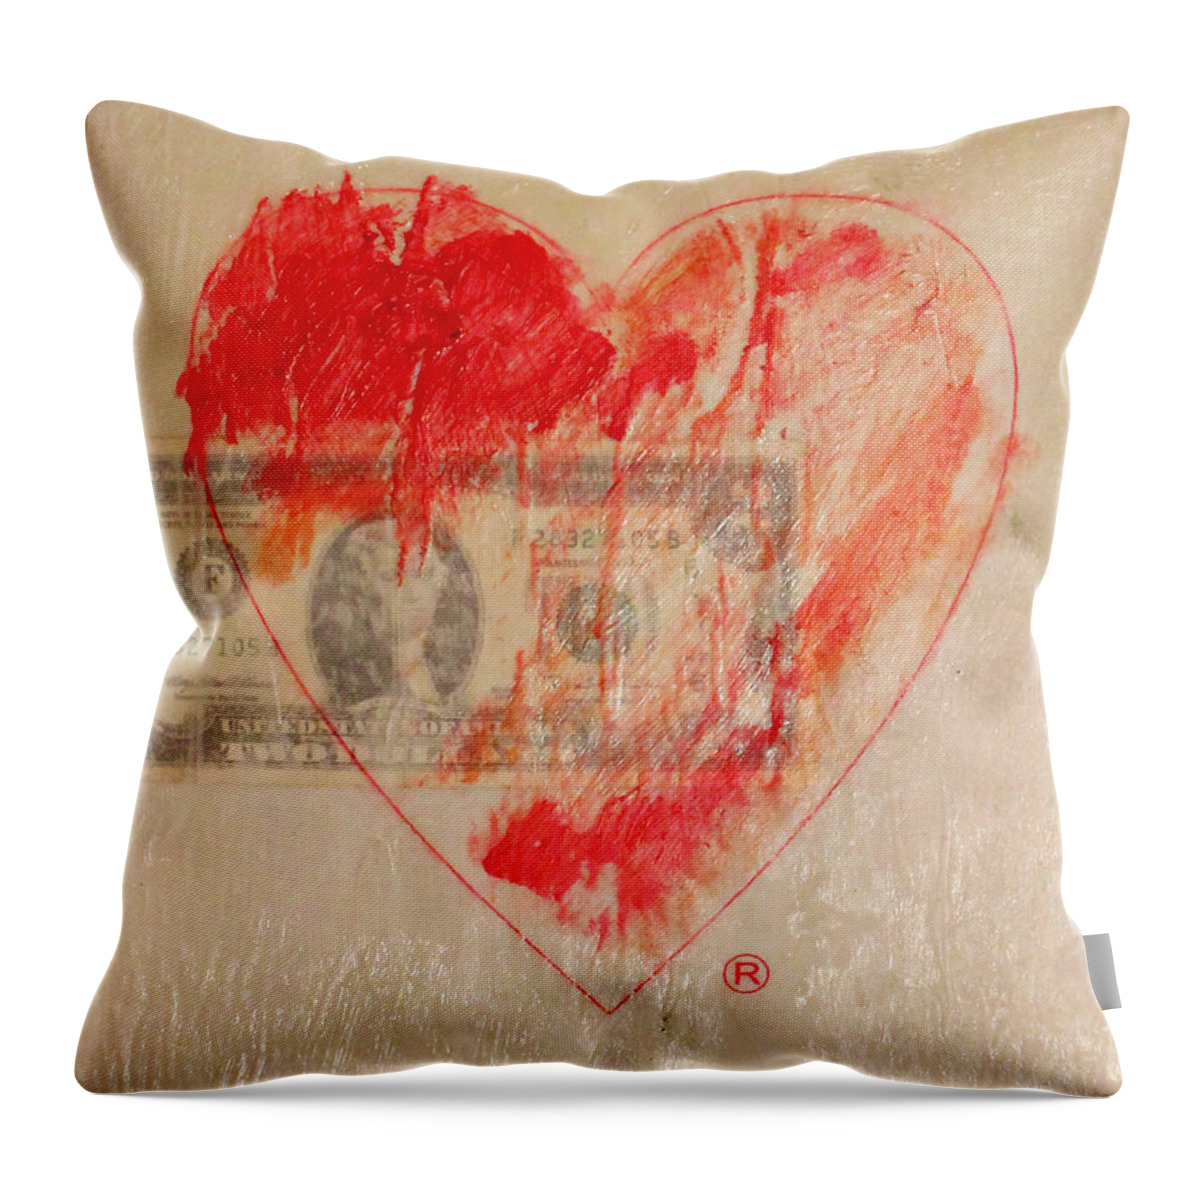 2009 Throw Pillow featuring the painting One Series 4 - Misery is a Company by Will Felix